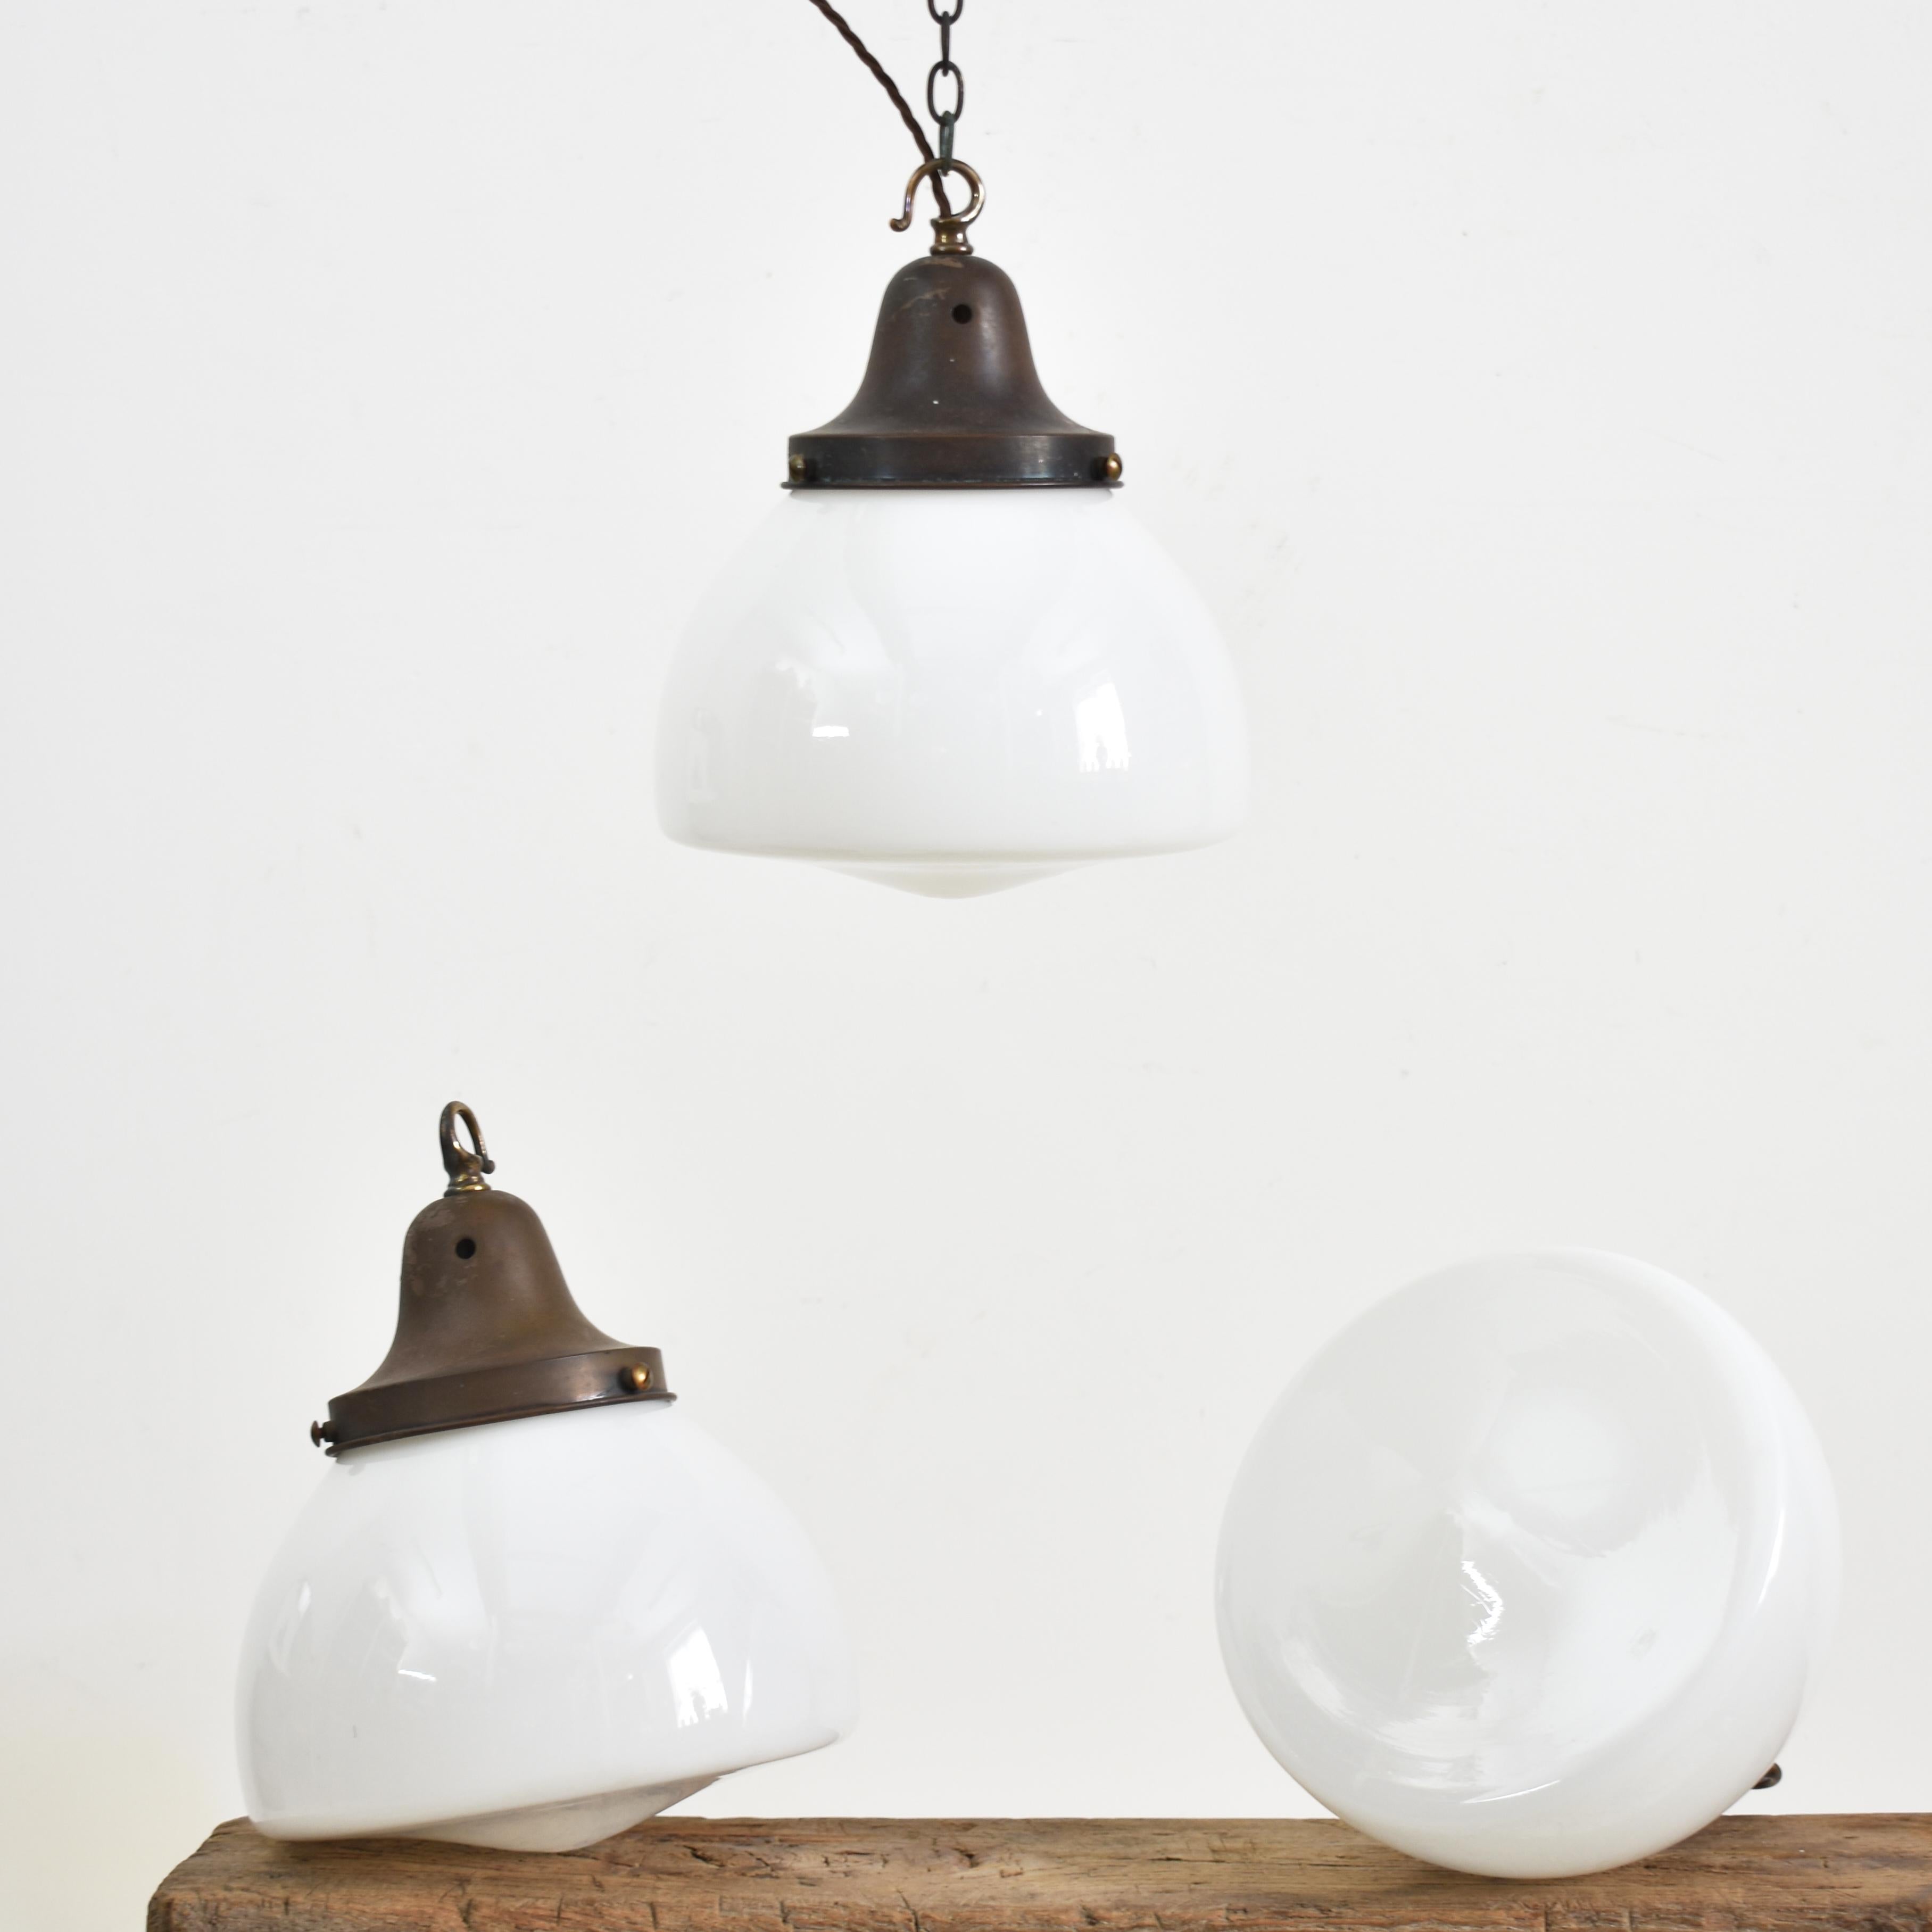 Antique Church Opaline Pendant Light – T

An original opaline glass pendant light. The light has a milk glass opaline shade and original brass hanging gallery. The gallery finish has been left untouched in it original